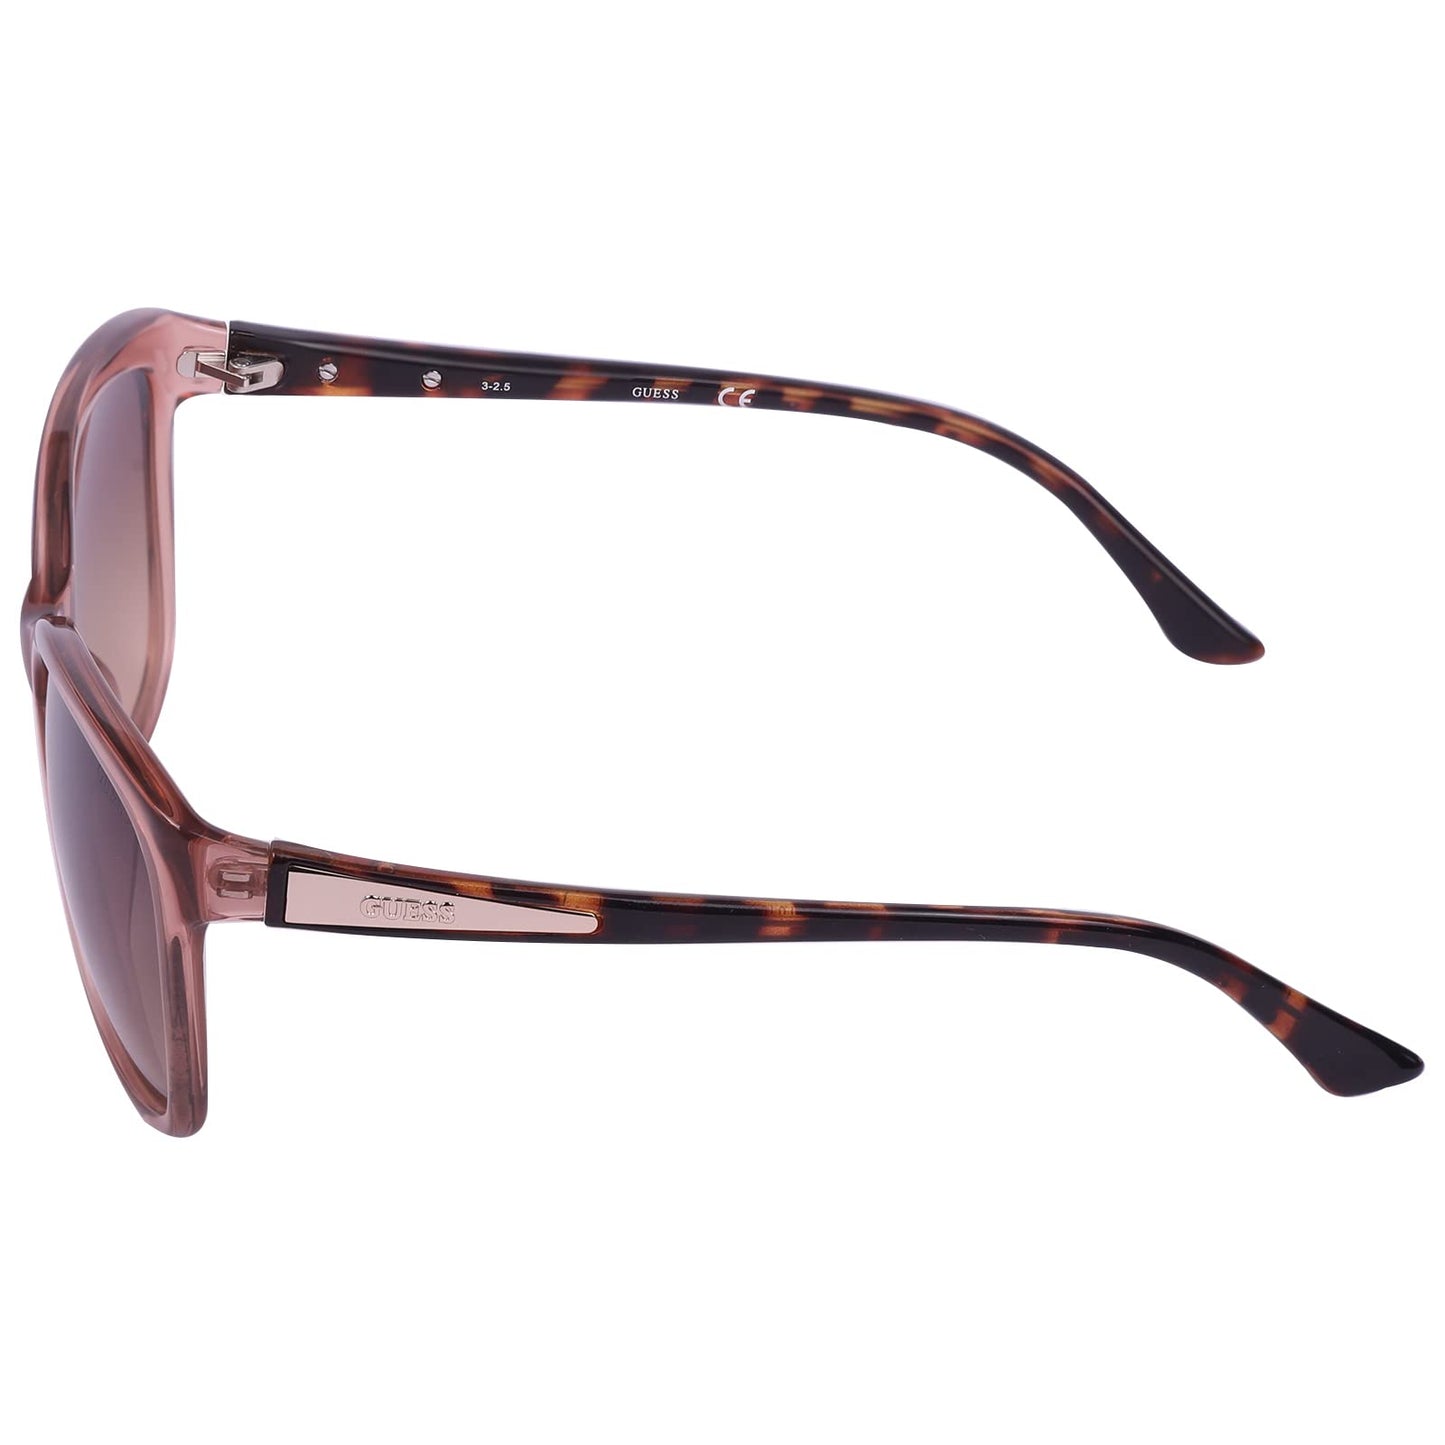 GUESS Gradient Butterfly Women's Sunglasses 7346 PE 34|58|Brown Color Lens - Pack of 1